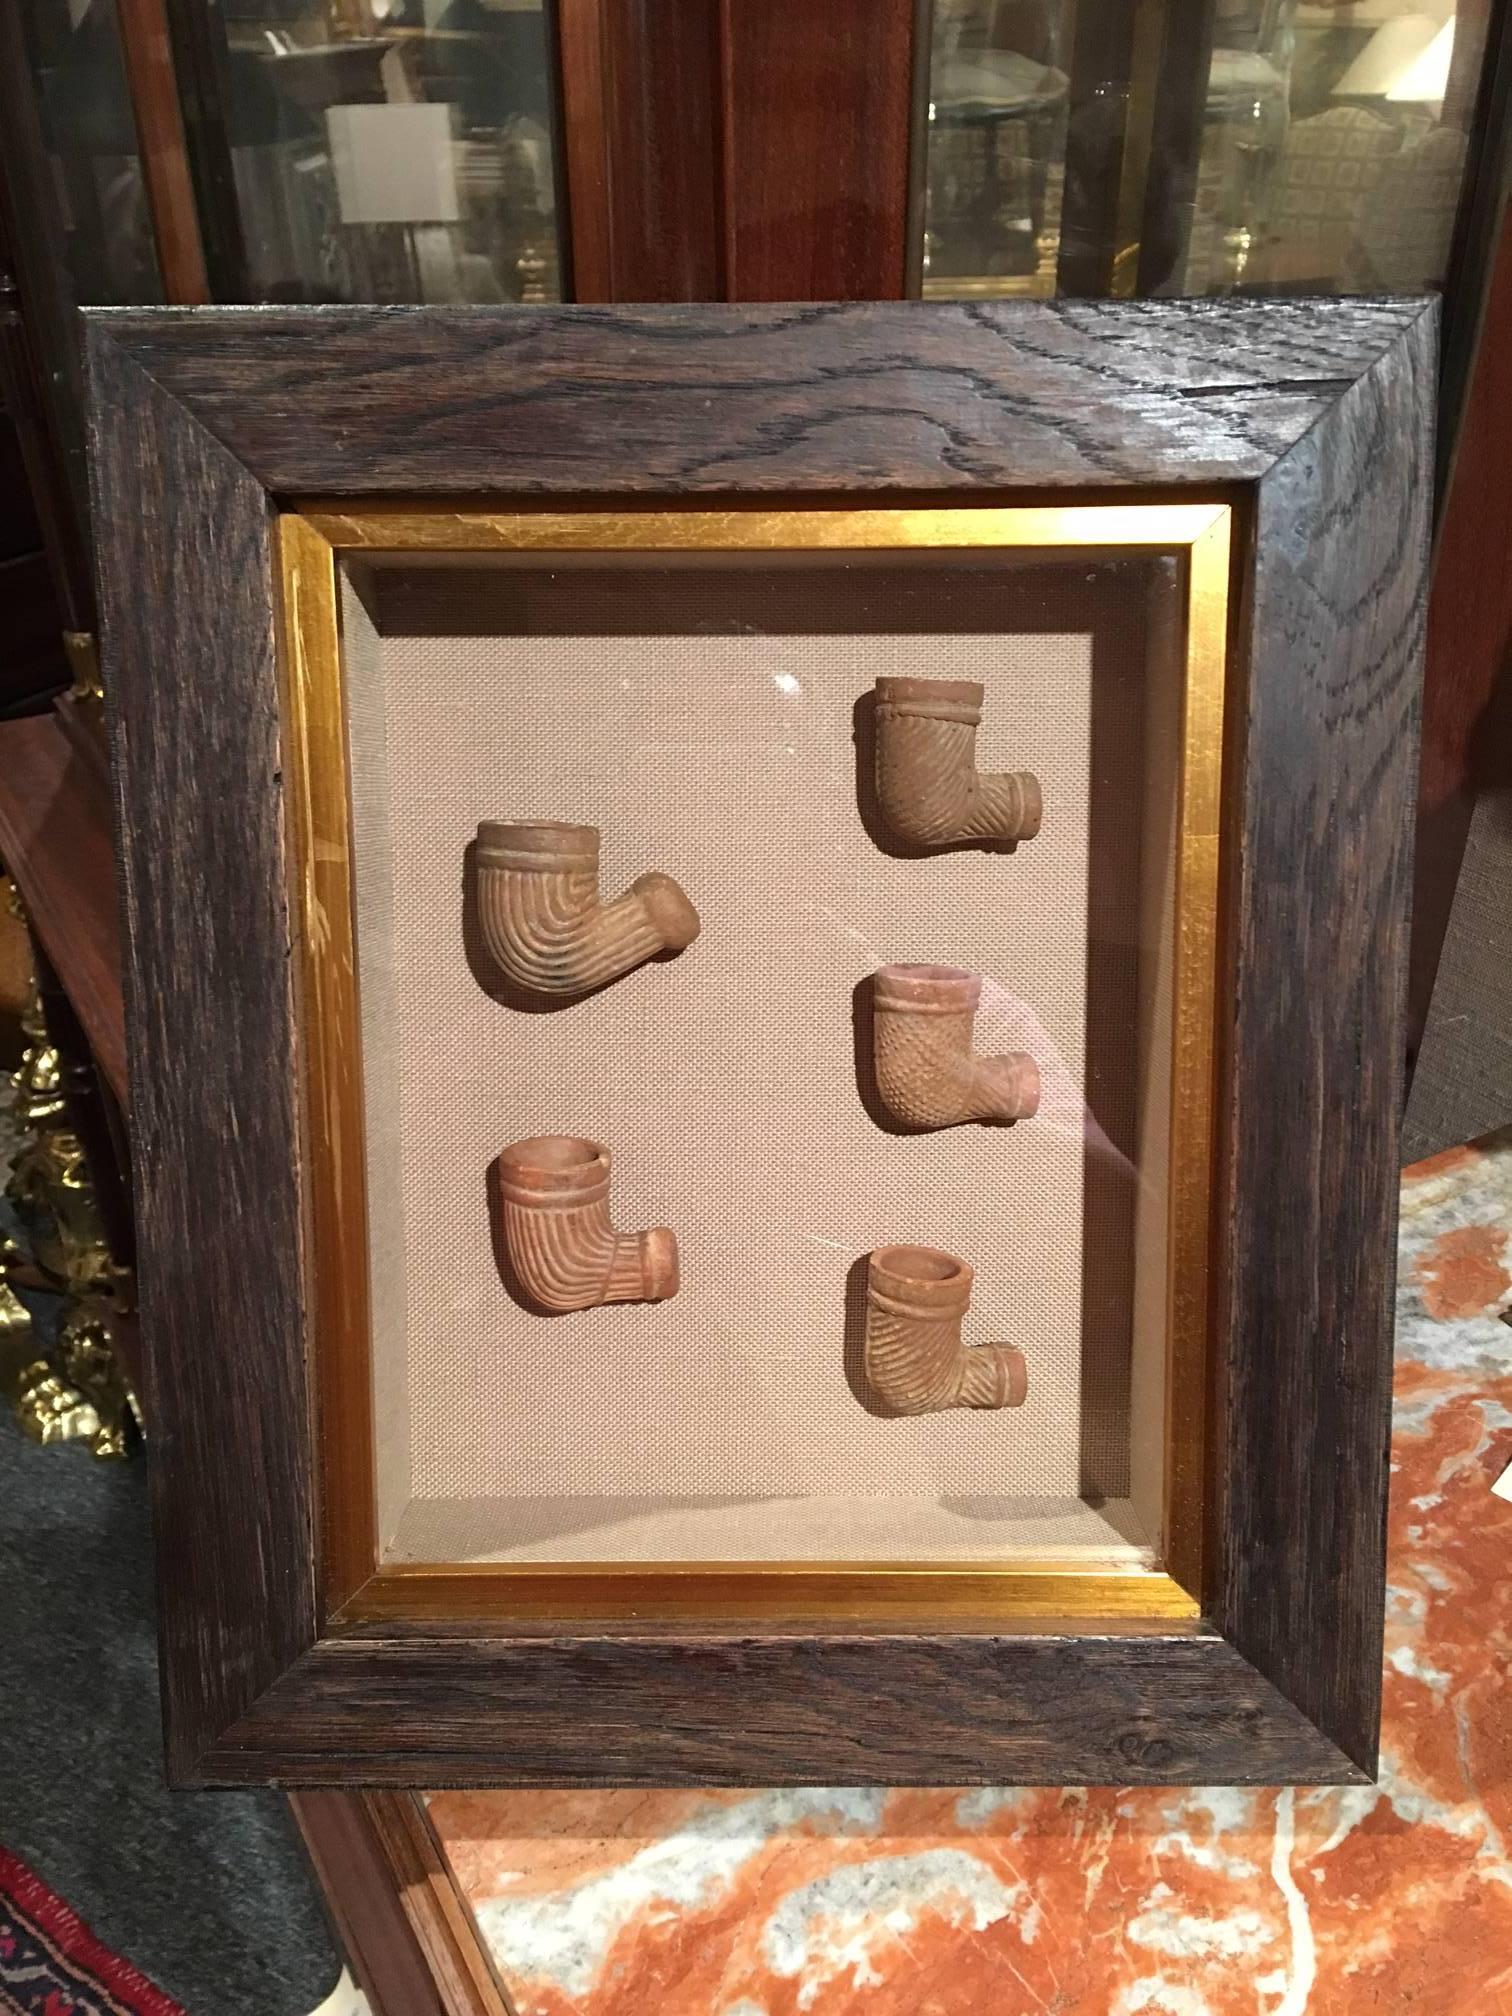 Set of five terracotta pipes framed in a shadow box, 19th century. Linen matting. Native American.